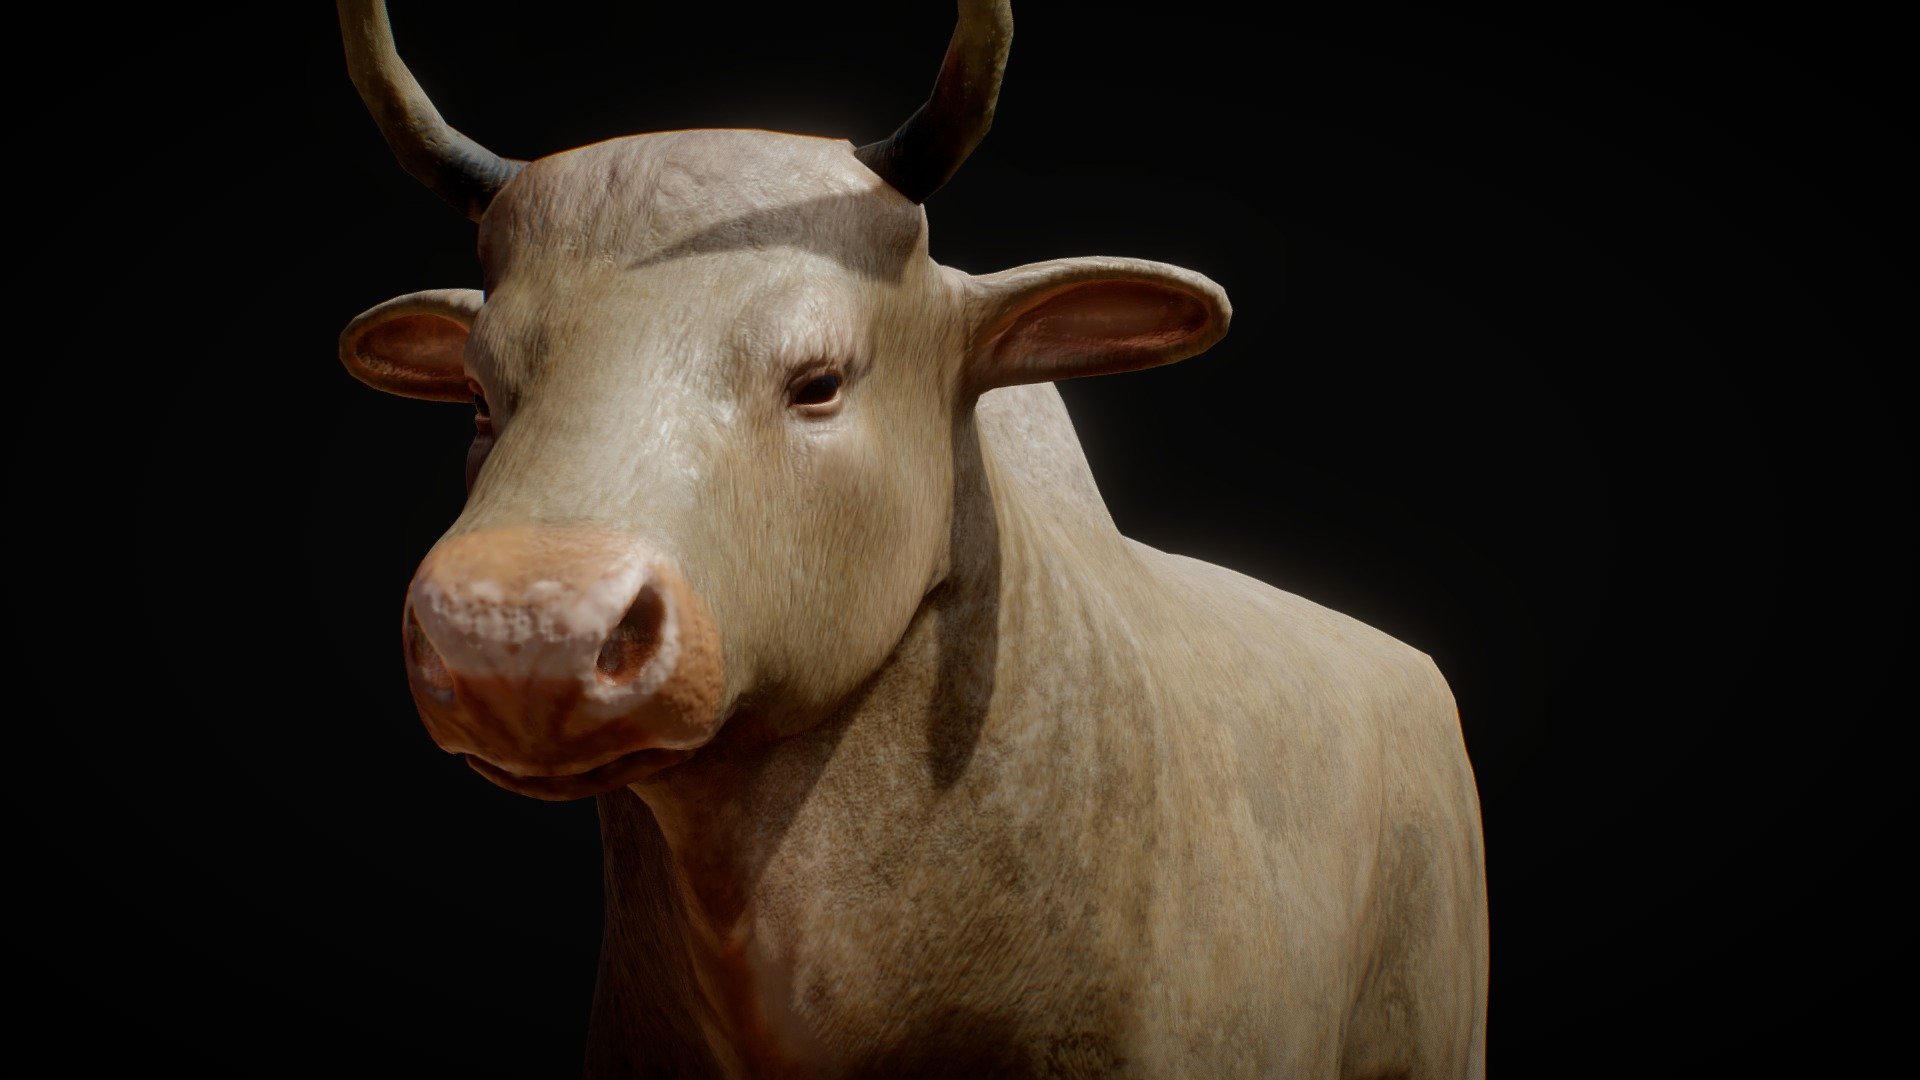 Hello! This is a bull model hand painted and sculpted, the package comes with High, Mid and Low poly versions in OBJ format,4K PBR Texture maps and it also comes with the Substance Painter file for easy change of colors.

With the latest update, inside the additional files, you can now find new horn, eyes and skin shaders compatible with Cycles and Eevee. Added particle fur and a body rig for quick scenes. No shapekeys and no facial rig for now, requires Blender 3D tho 3d model